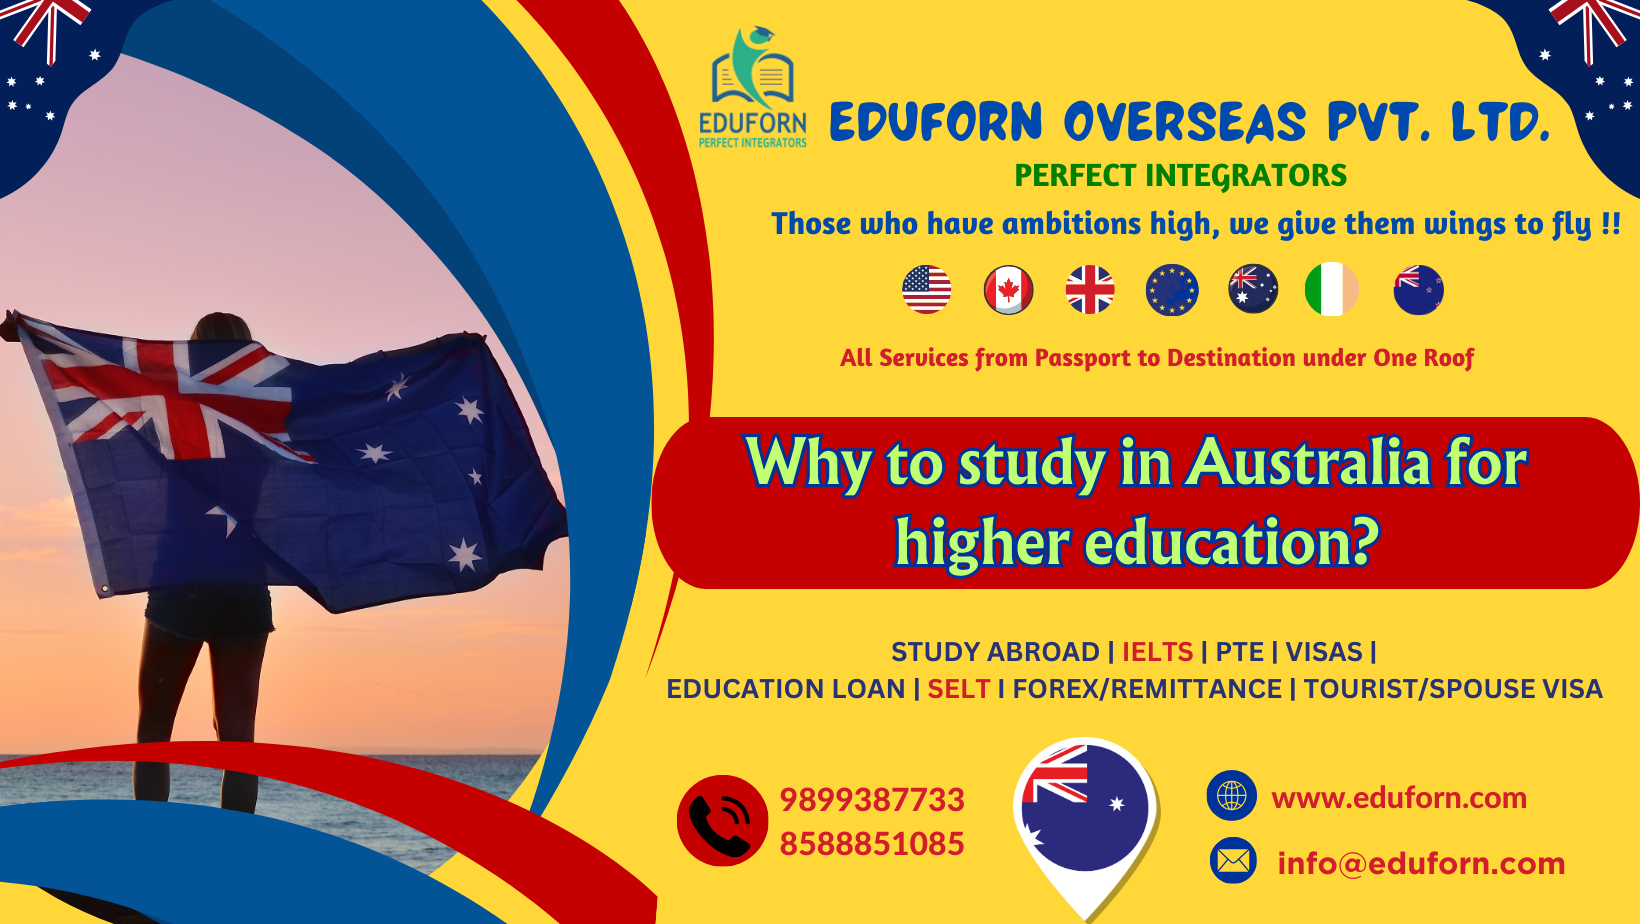 Why to Study in Australia for Higher Education?